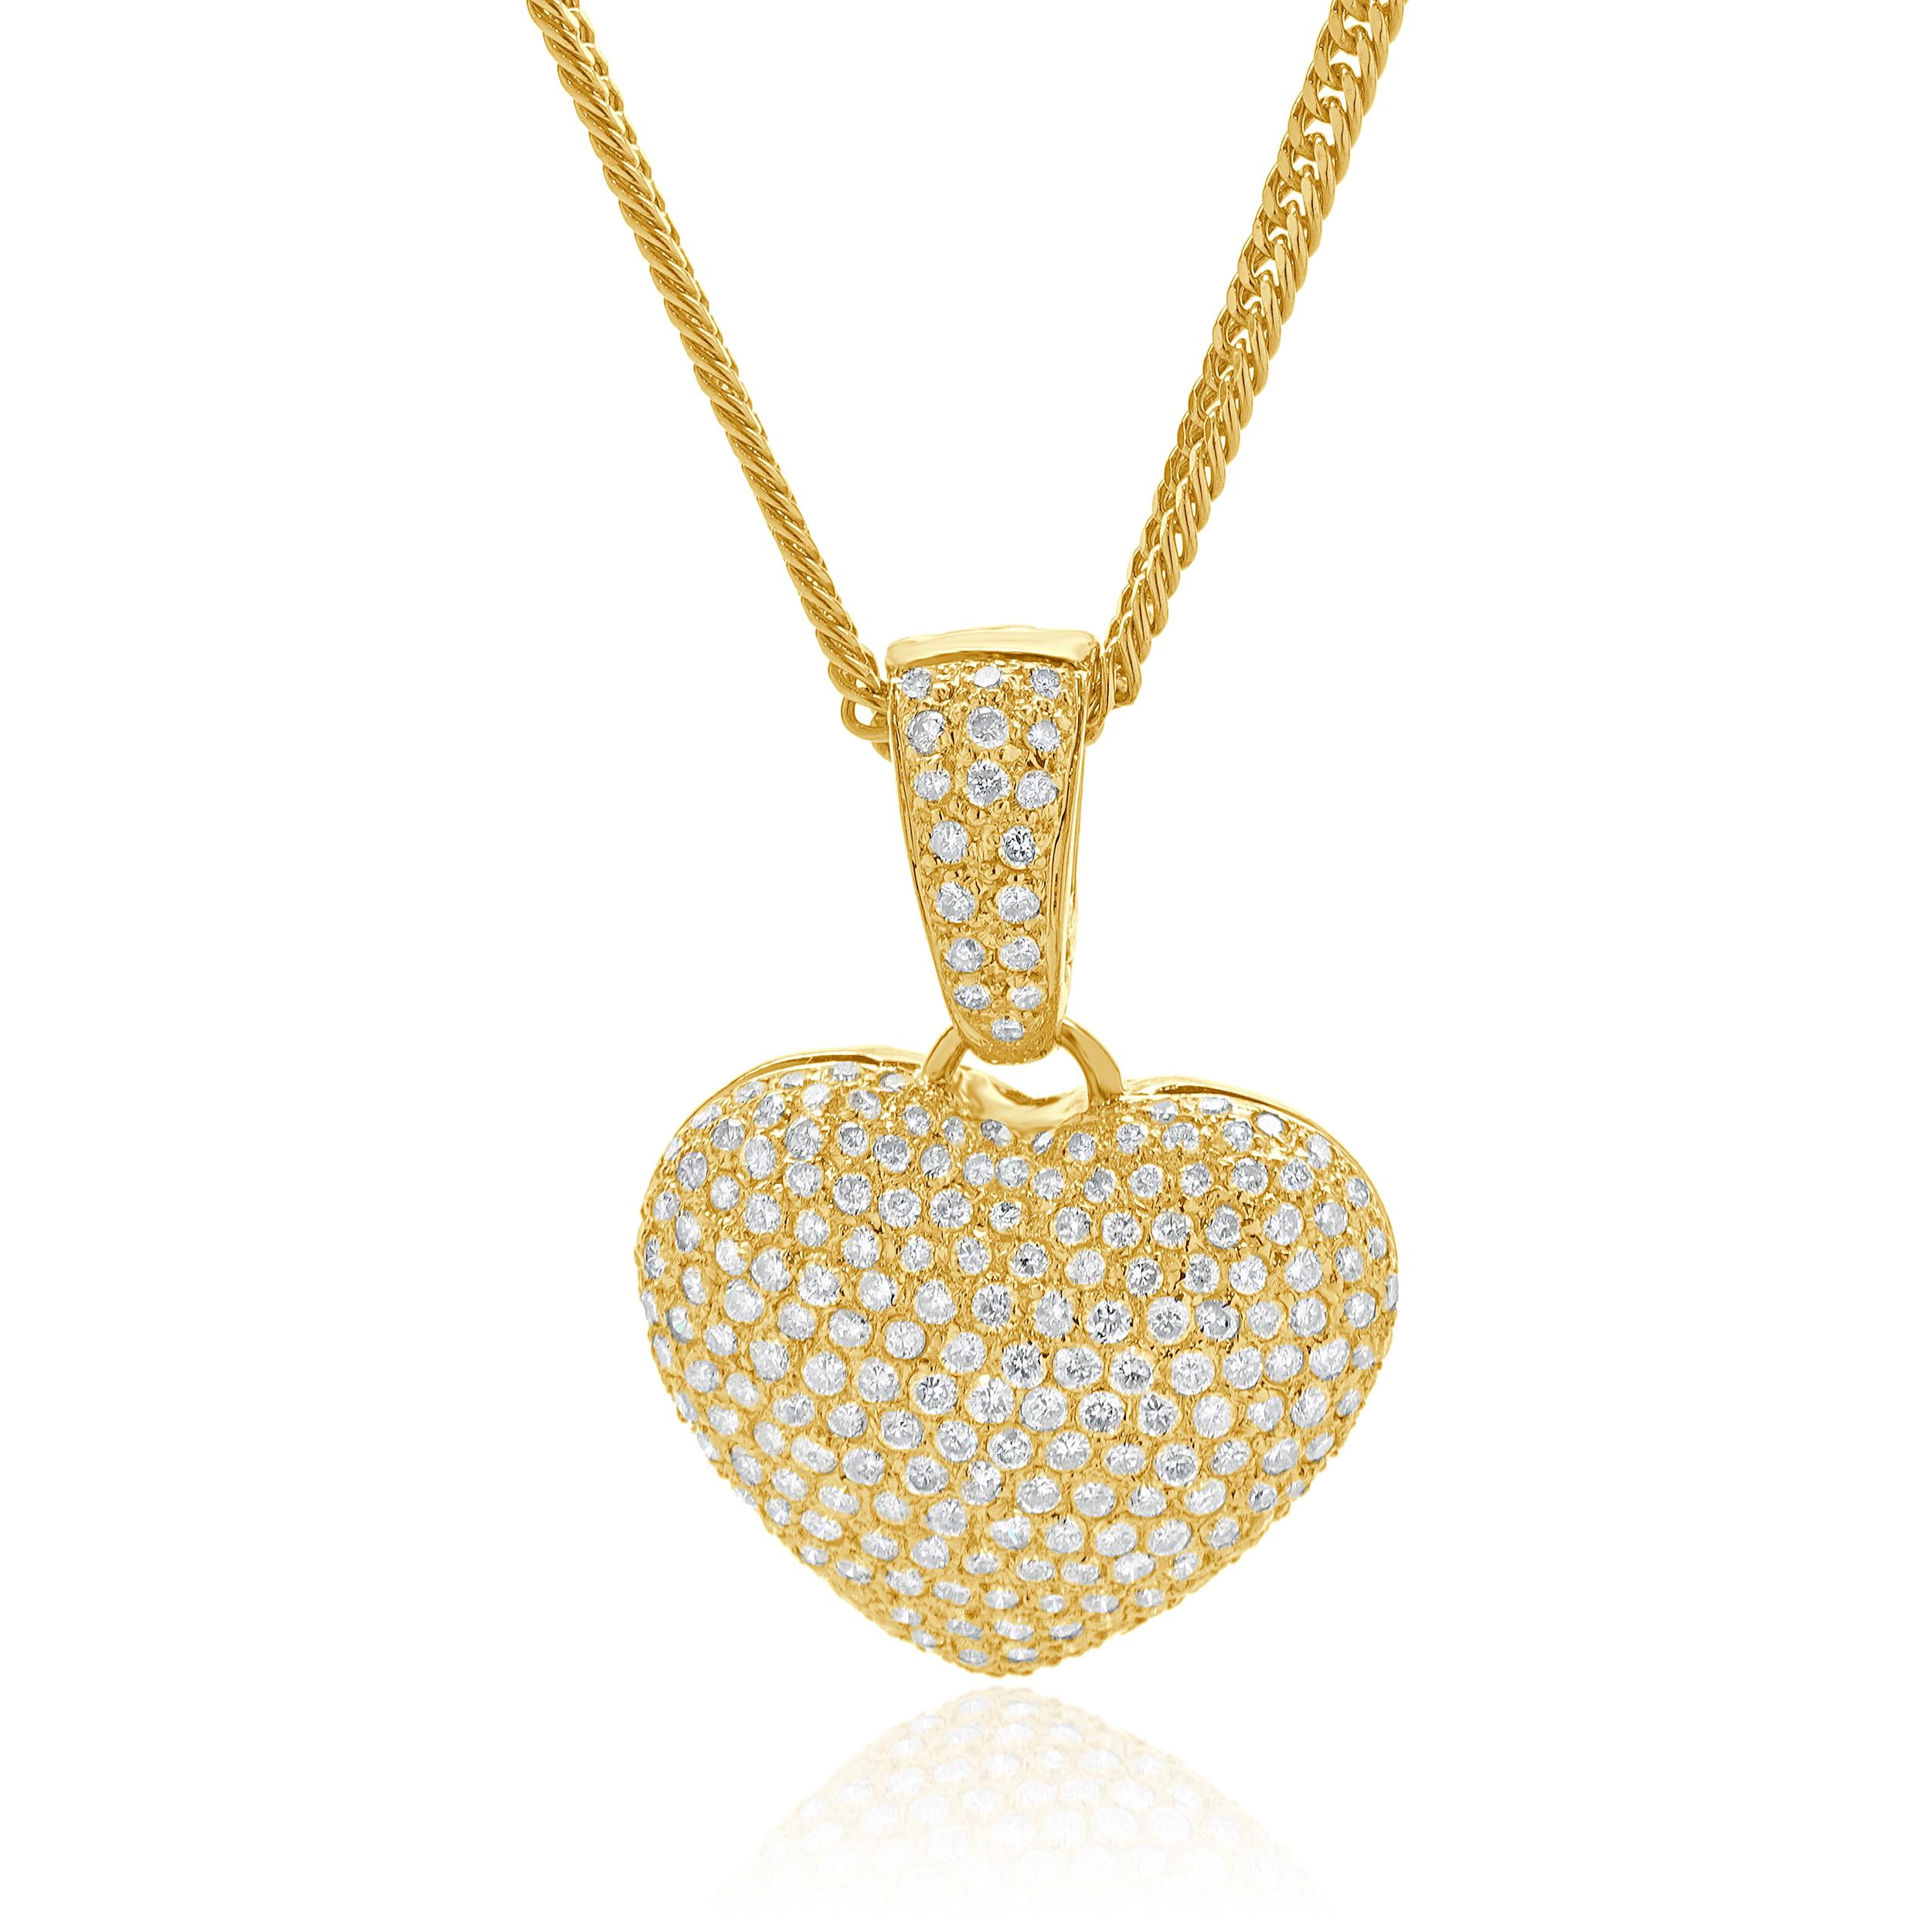 Designer: custom
Material: 18K yellow gold
Diamonds: 198 round brilliant cut = 6.00cttw
Color: G
Clarity: SI1
Dimensions: necklace measures 18-inches in length
Weight: 18.91 grams
